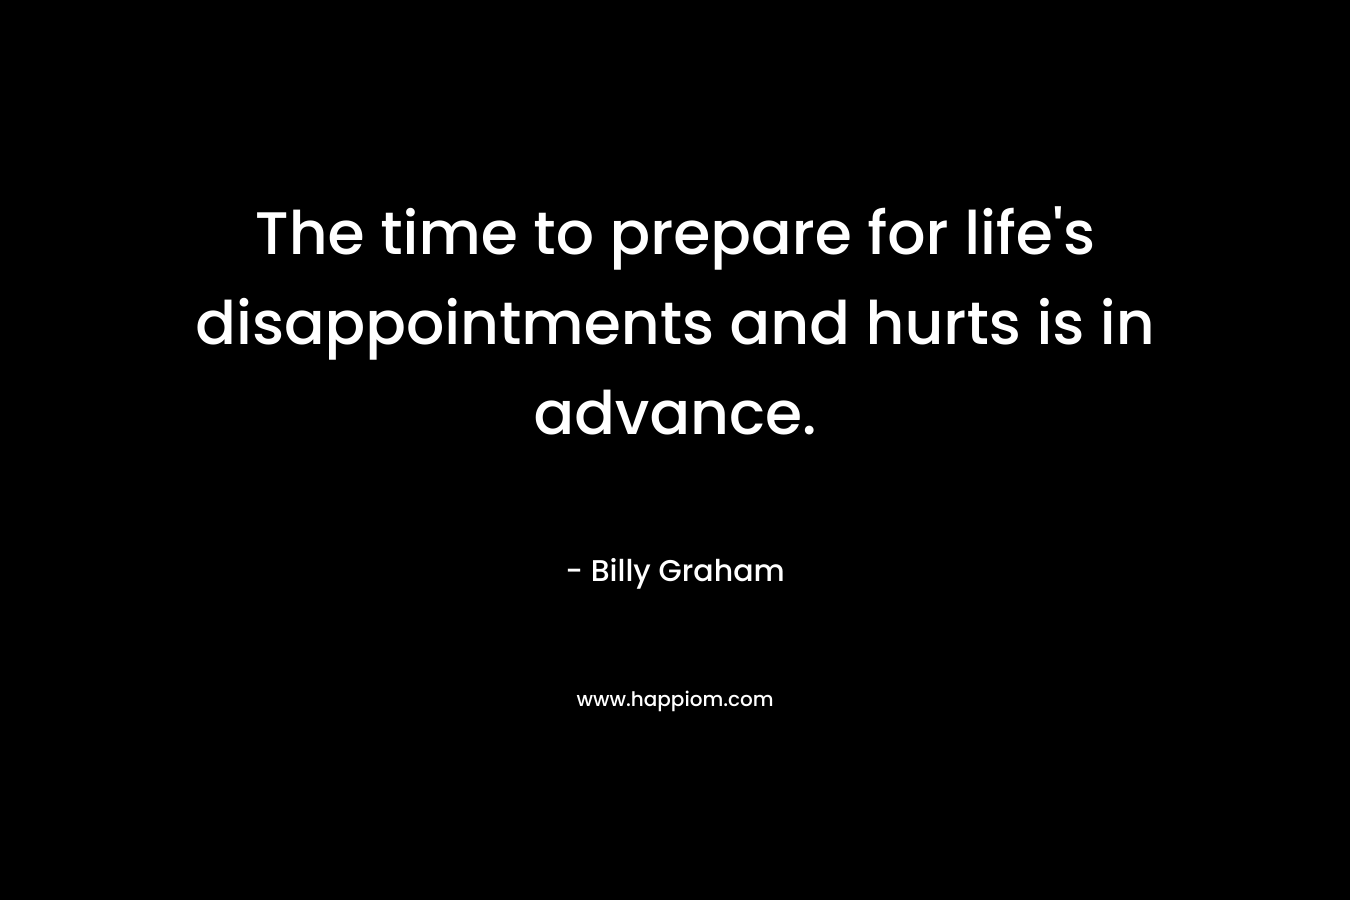 The time to prepare for life’s disappointments and hurts is in advance. – Billy Graham